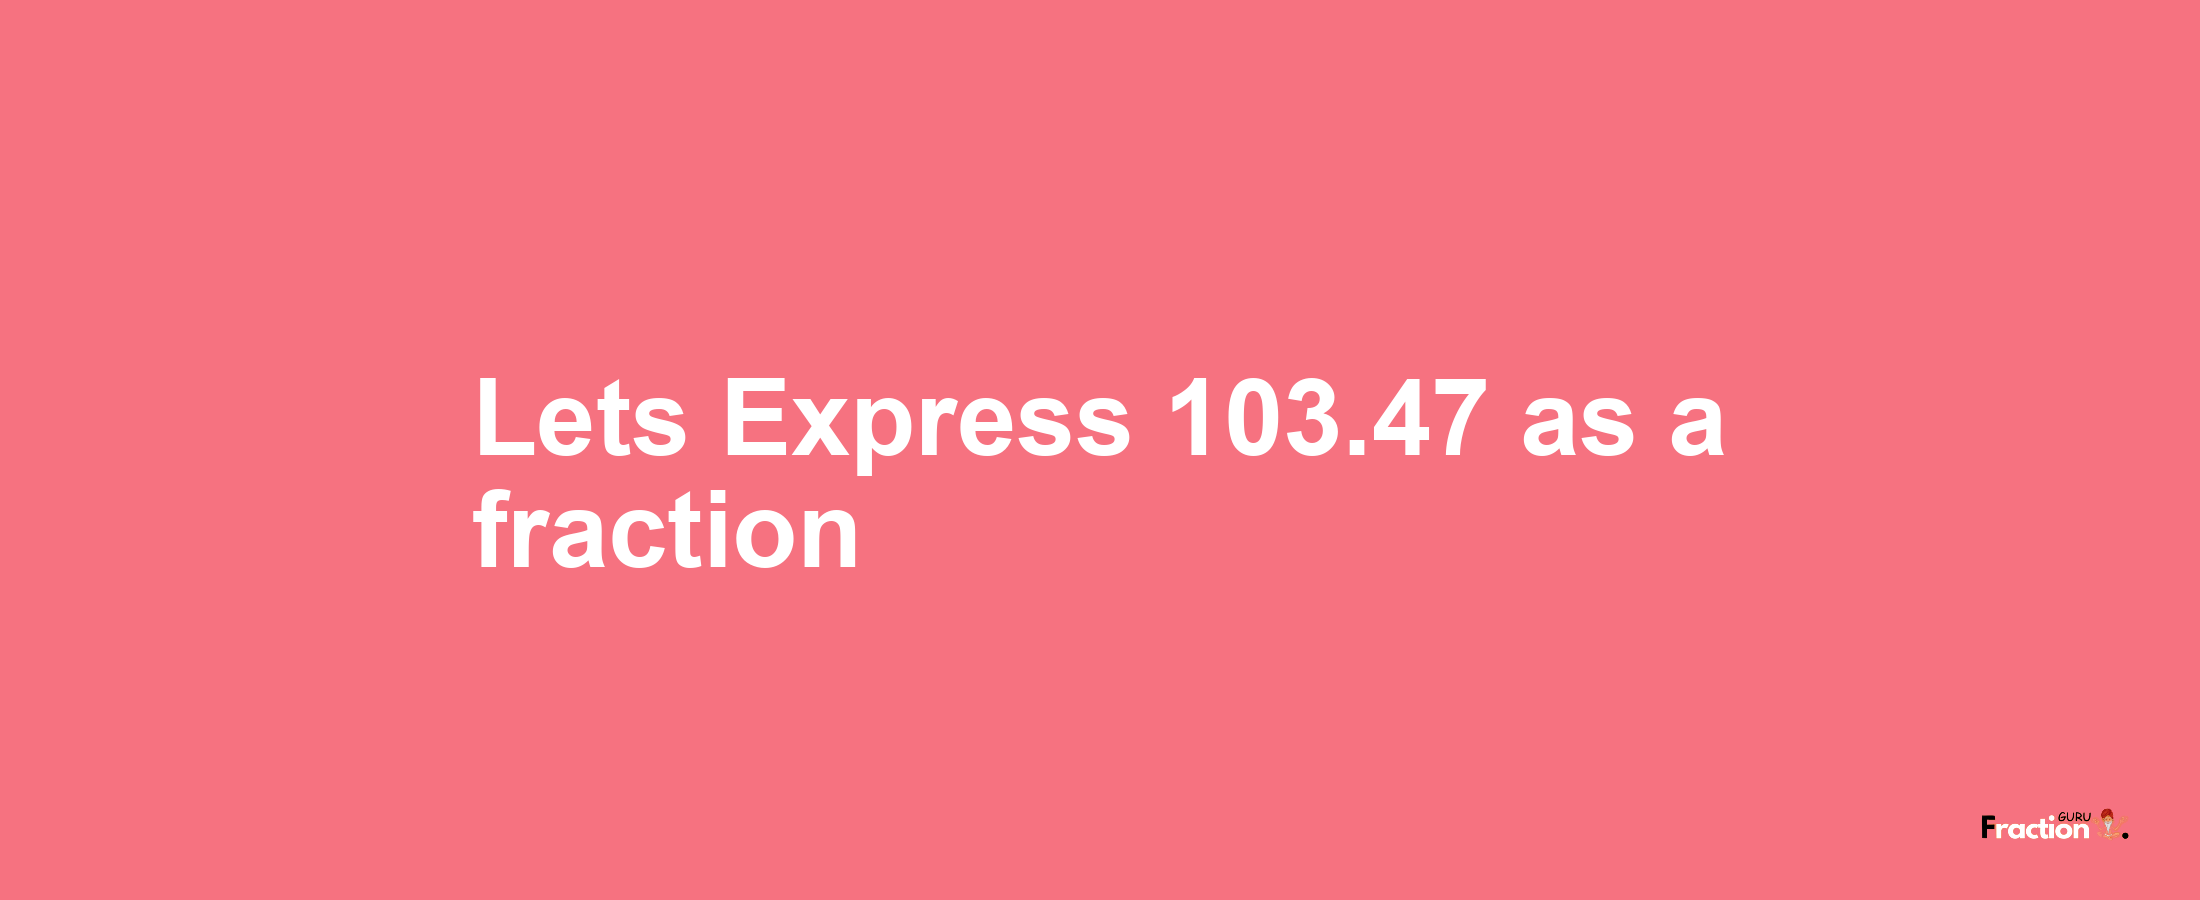 Lets Express 103.47 as afraction